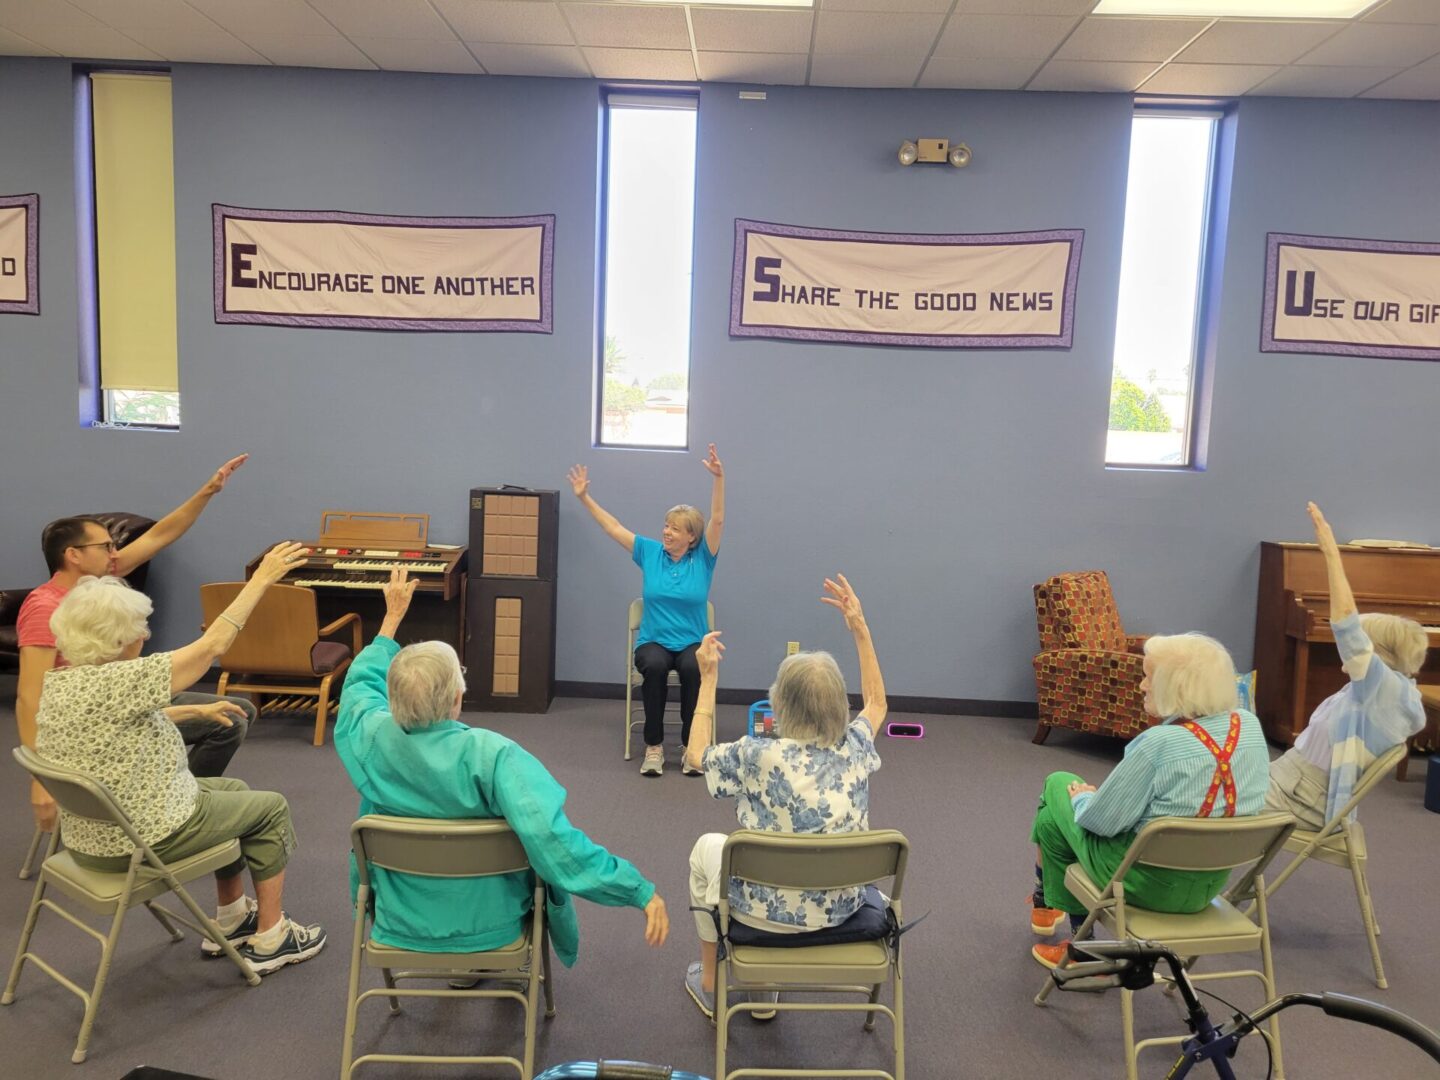 All old people sitting on chairs and raising their hands